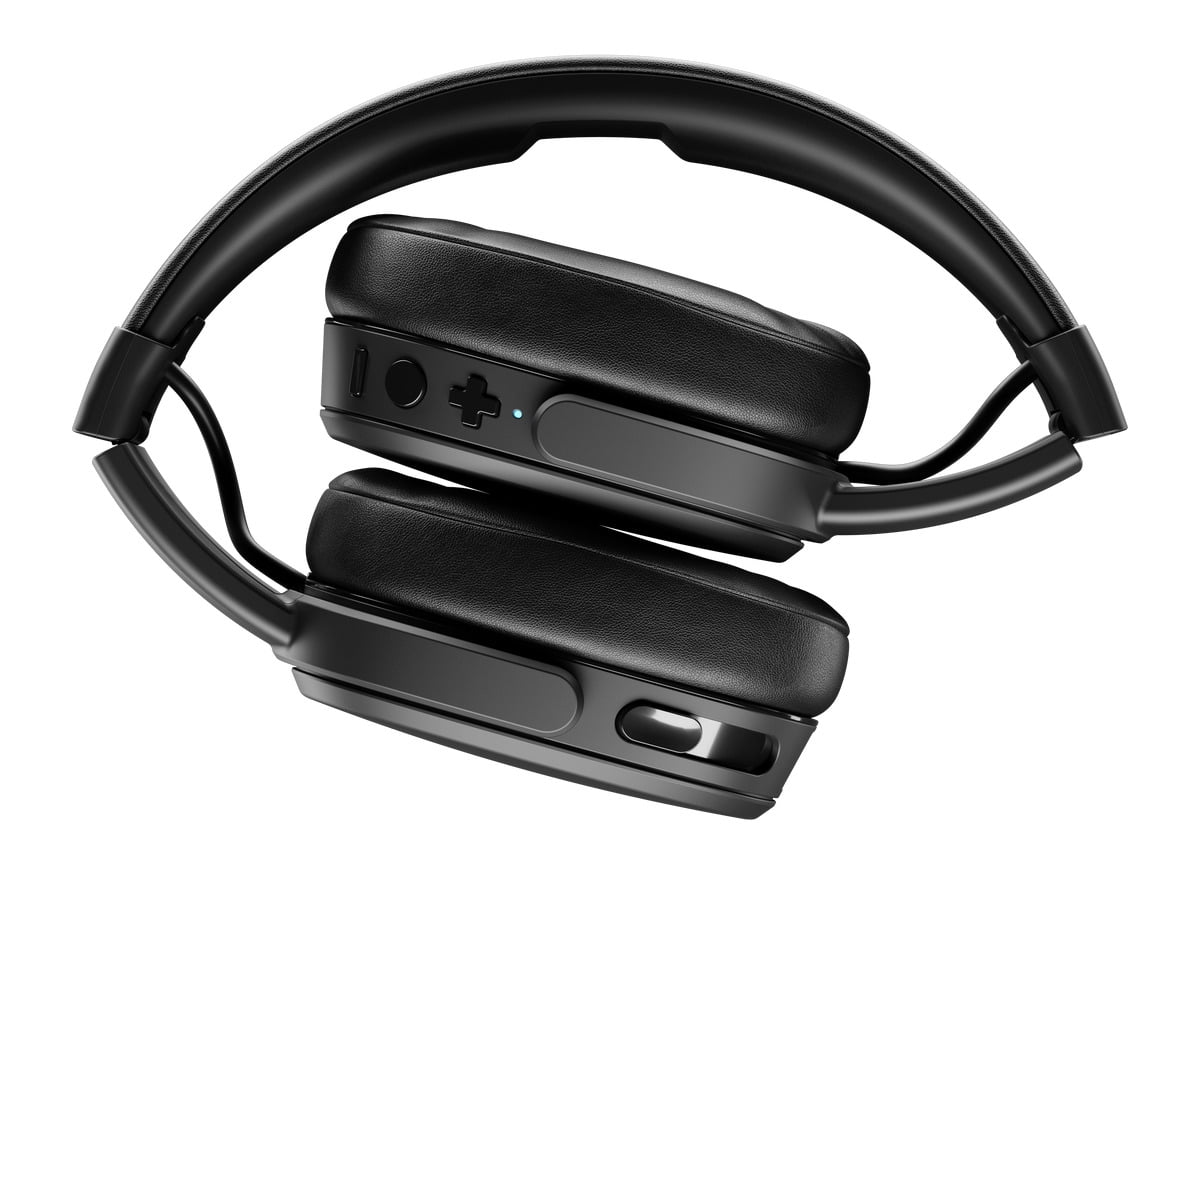 Incompetencia embotellamiento Confuso Skullcandy Crusher Wireless BT Over-Ear Headphone in Black Stereo Haptic  Bass - Walmart.com